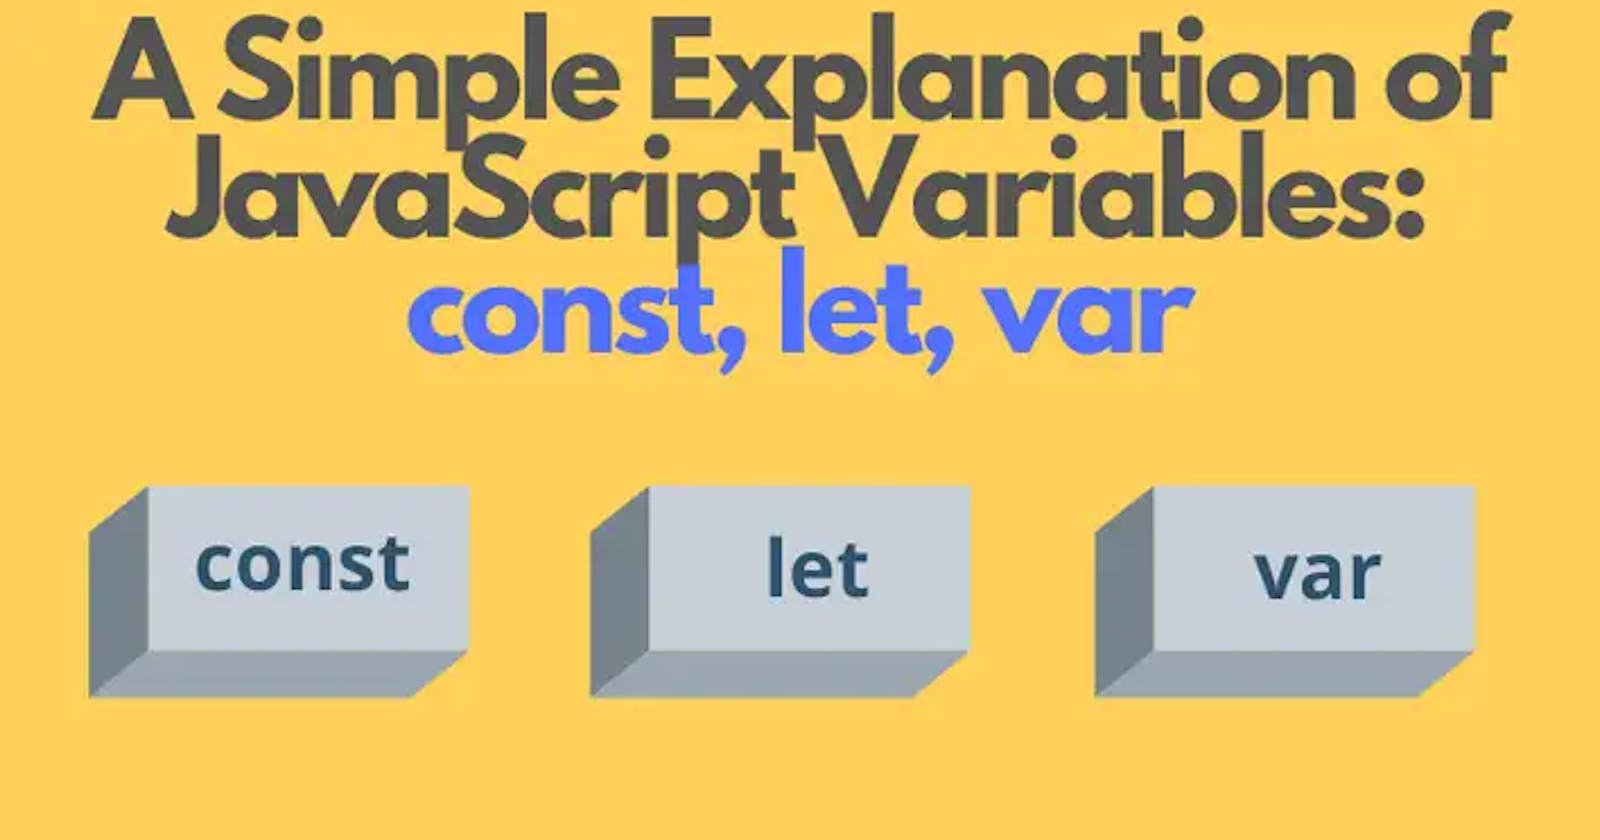 JavaScript Variable Declarations: Exploring the Differences between Var, Let, and Const